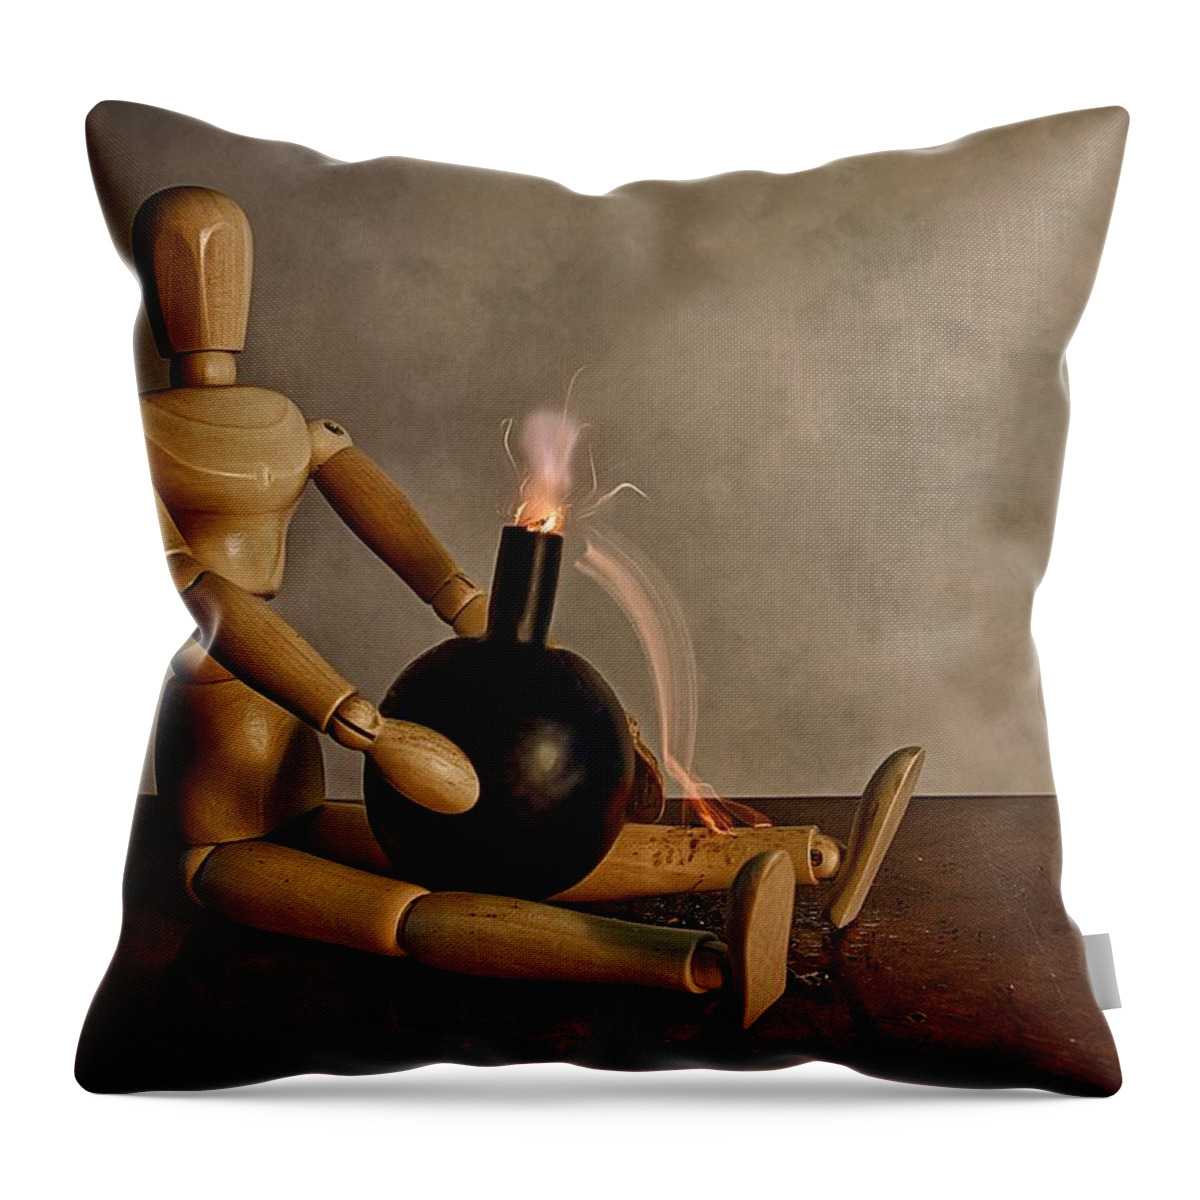 Woody Throw Pillow featuring the photograph Here Comes The Boom by Mark Fuller